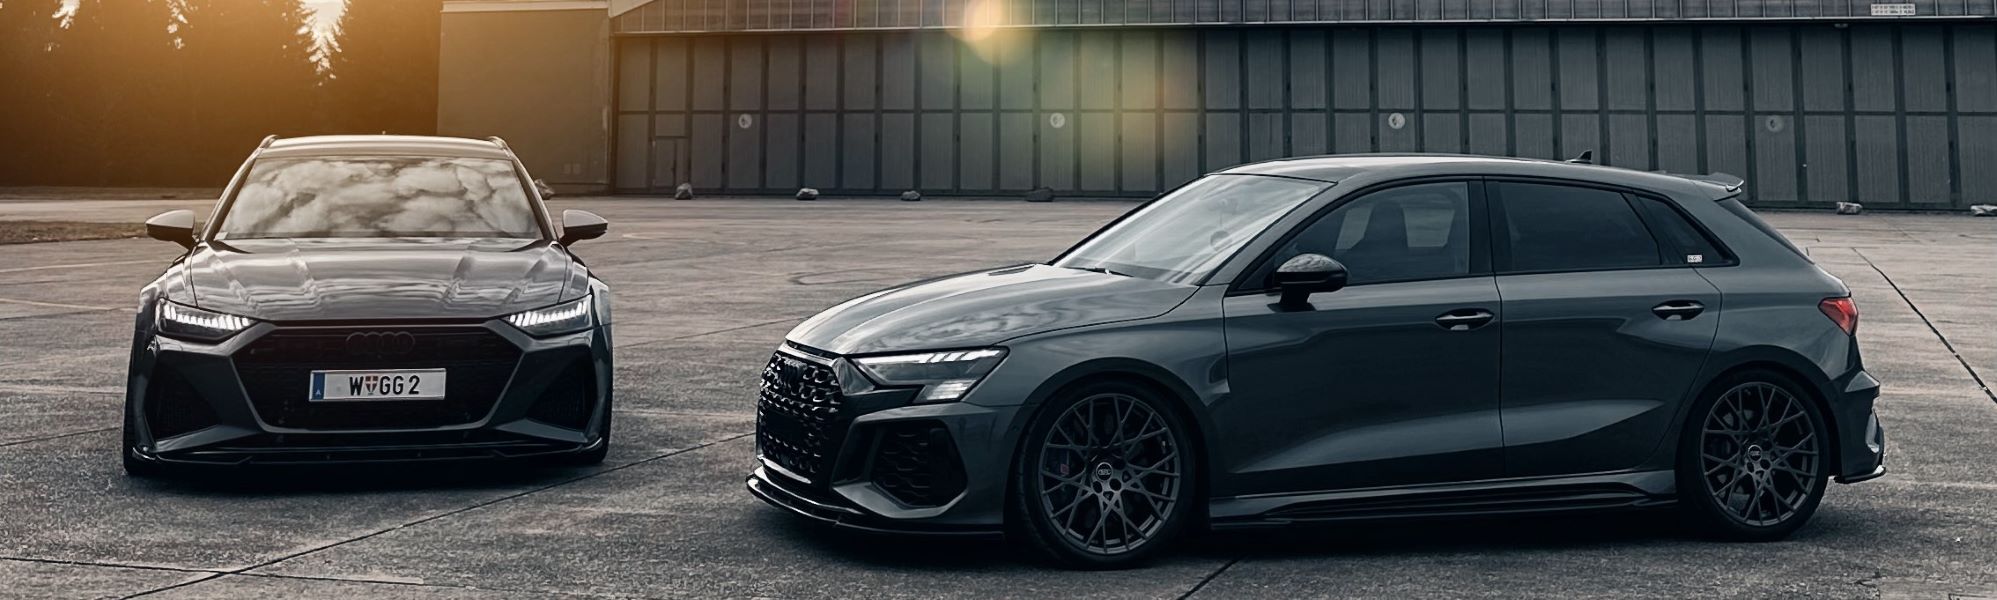 Upgrade for Audi RS Performance Models